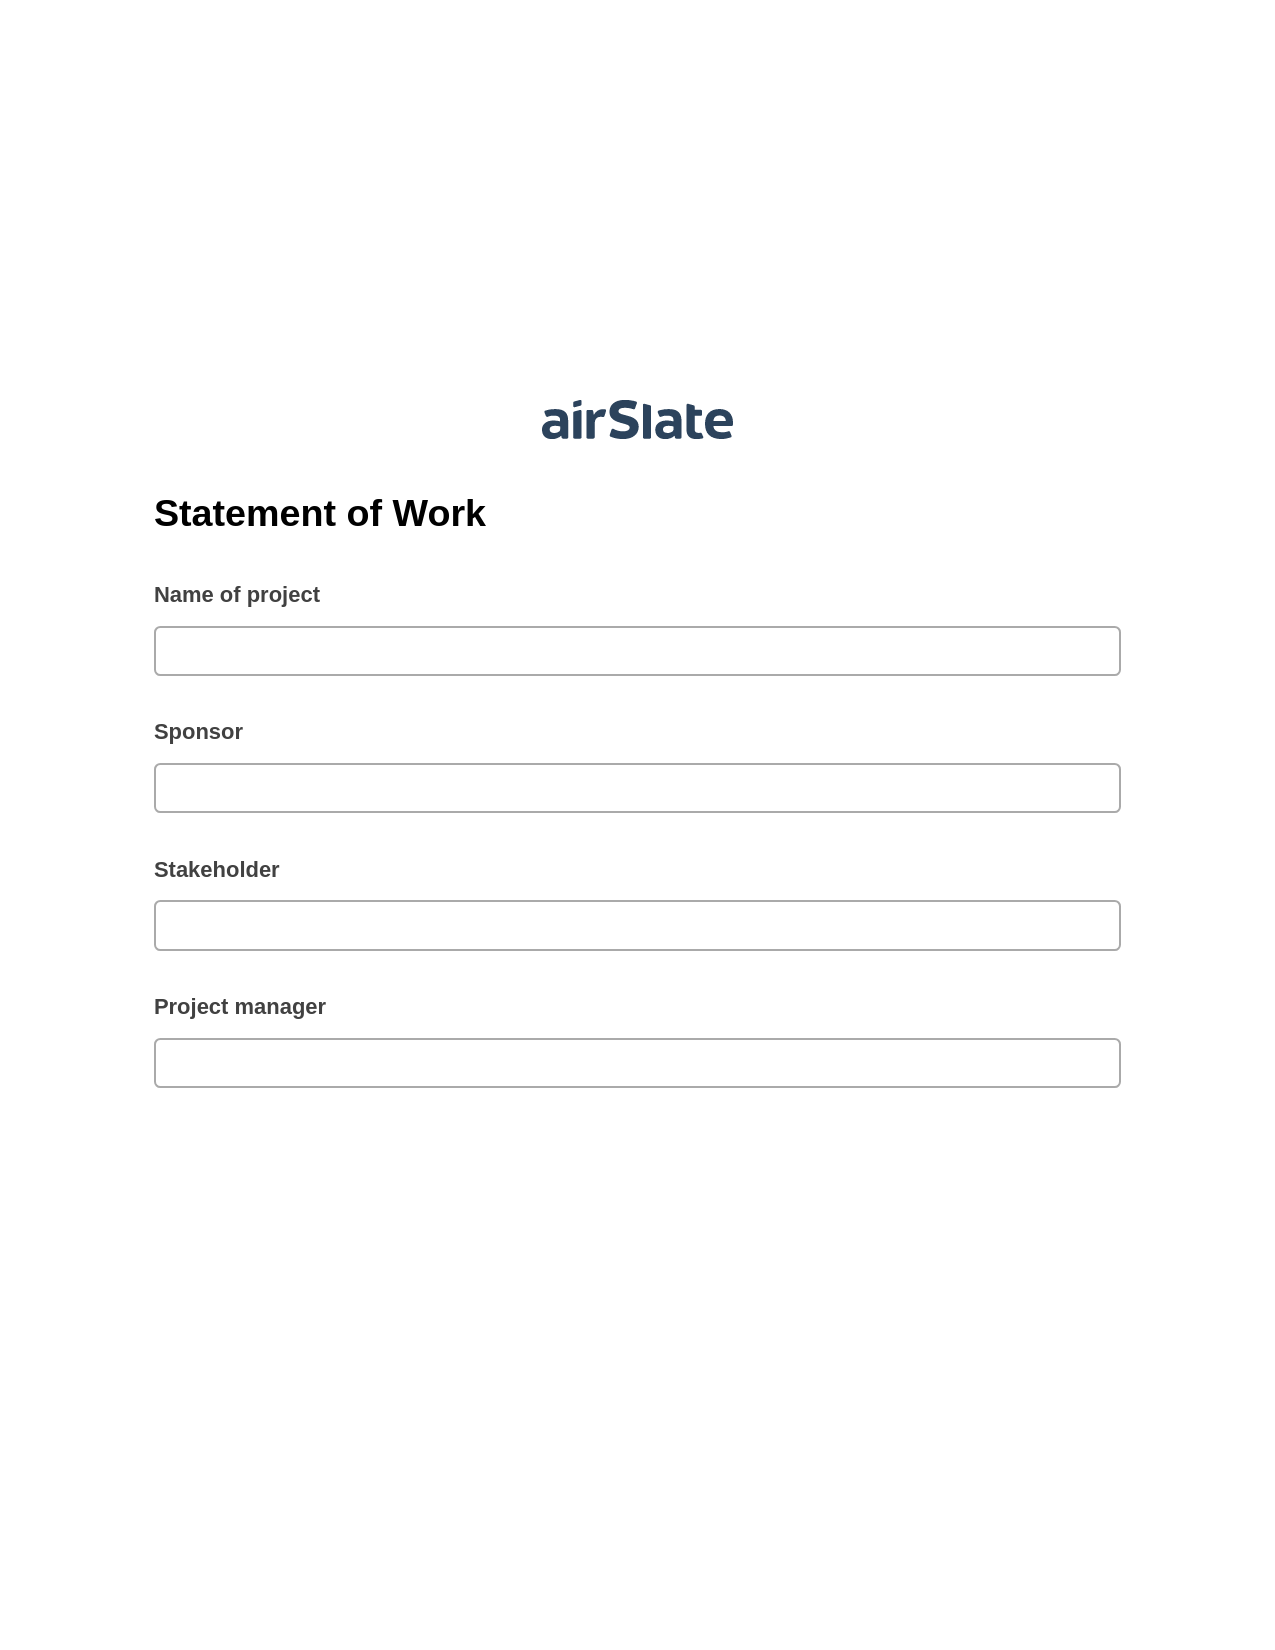 Statement of Work Pre-fill from Google Sheet Dropdown Options Bot, Send a Slate to Salesforce Contact Bot, Post-finish Document Bot